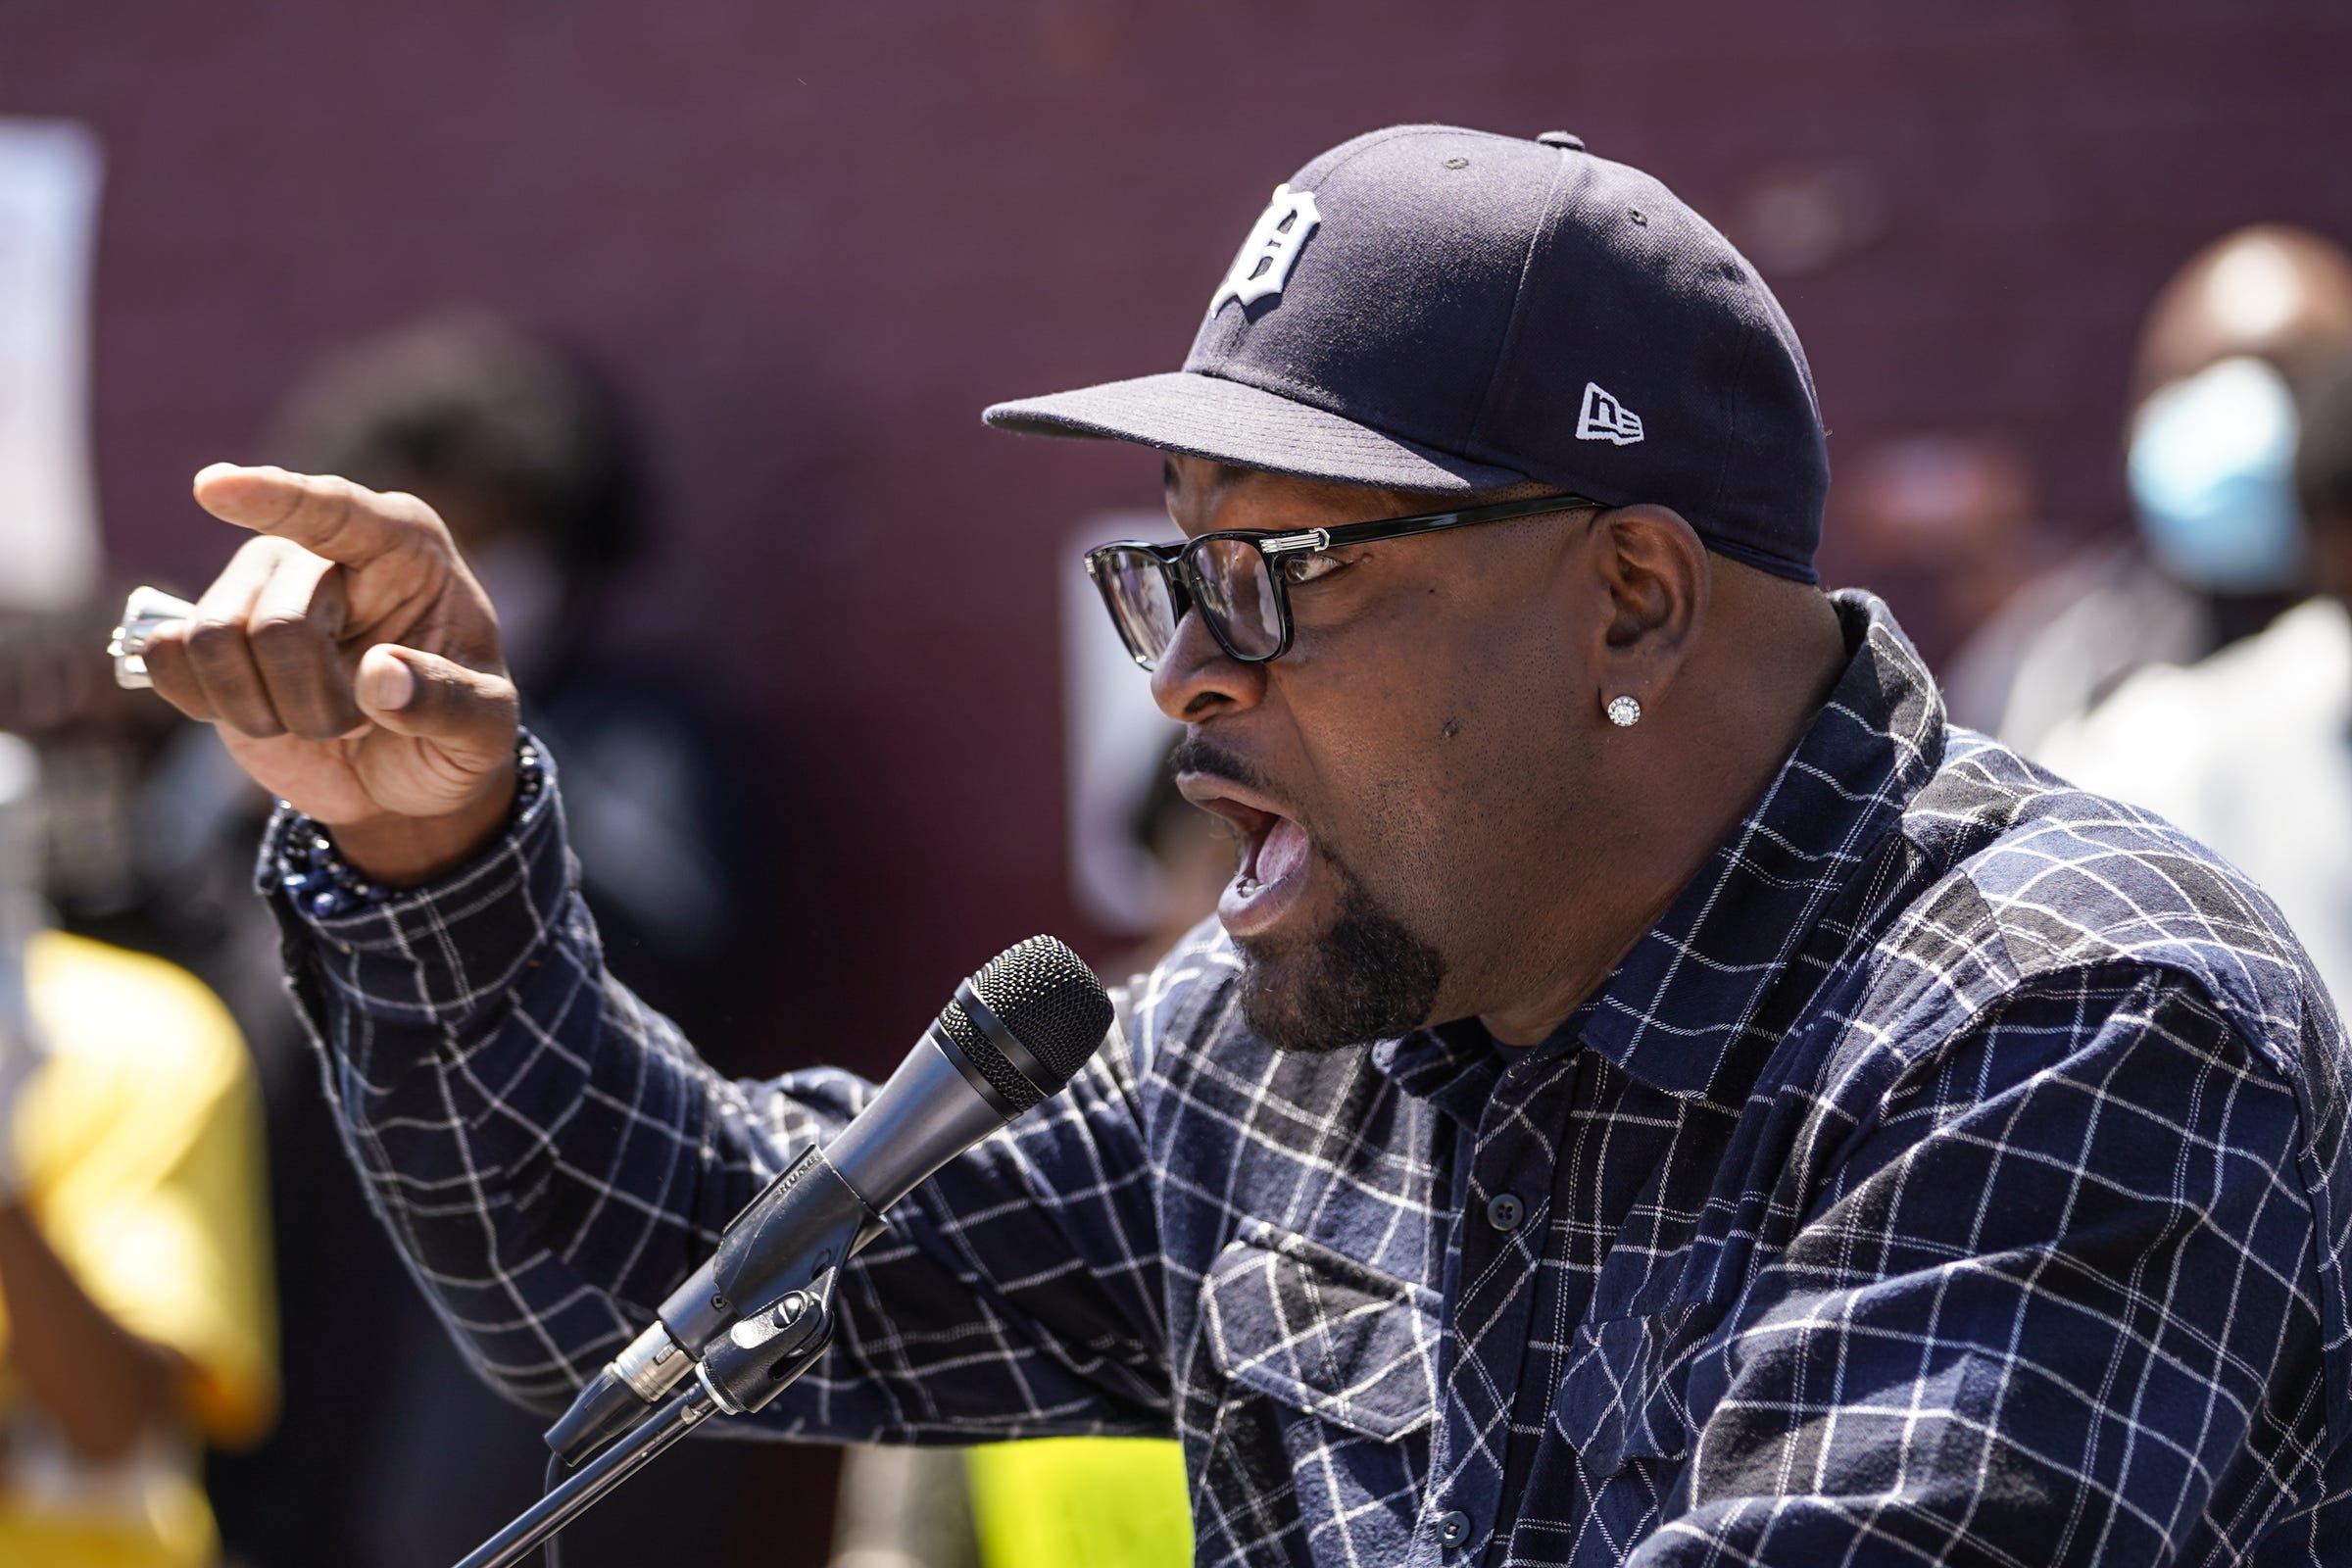 Trick Trick speaks during a rally put on by Detroit Council President Pro Tem Mary Sheffield on Monday, June 1, 2020 at the Detroit Association of Black Organizations in Detroit. Speakers ranged from iconic Detroiters, activists and community leadersthat spoke on  calls for justice and to direct the pain and protest towards progress and away from destruction. 